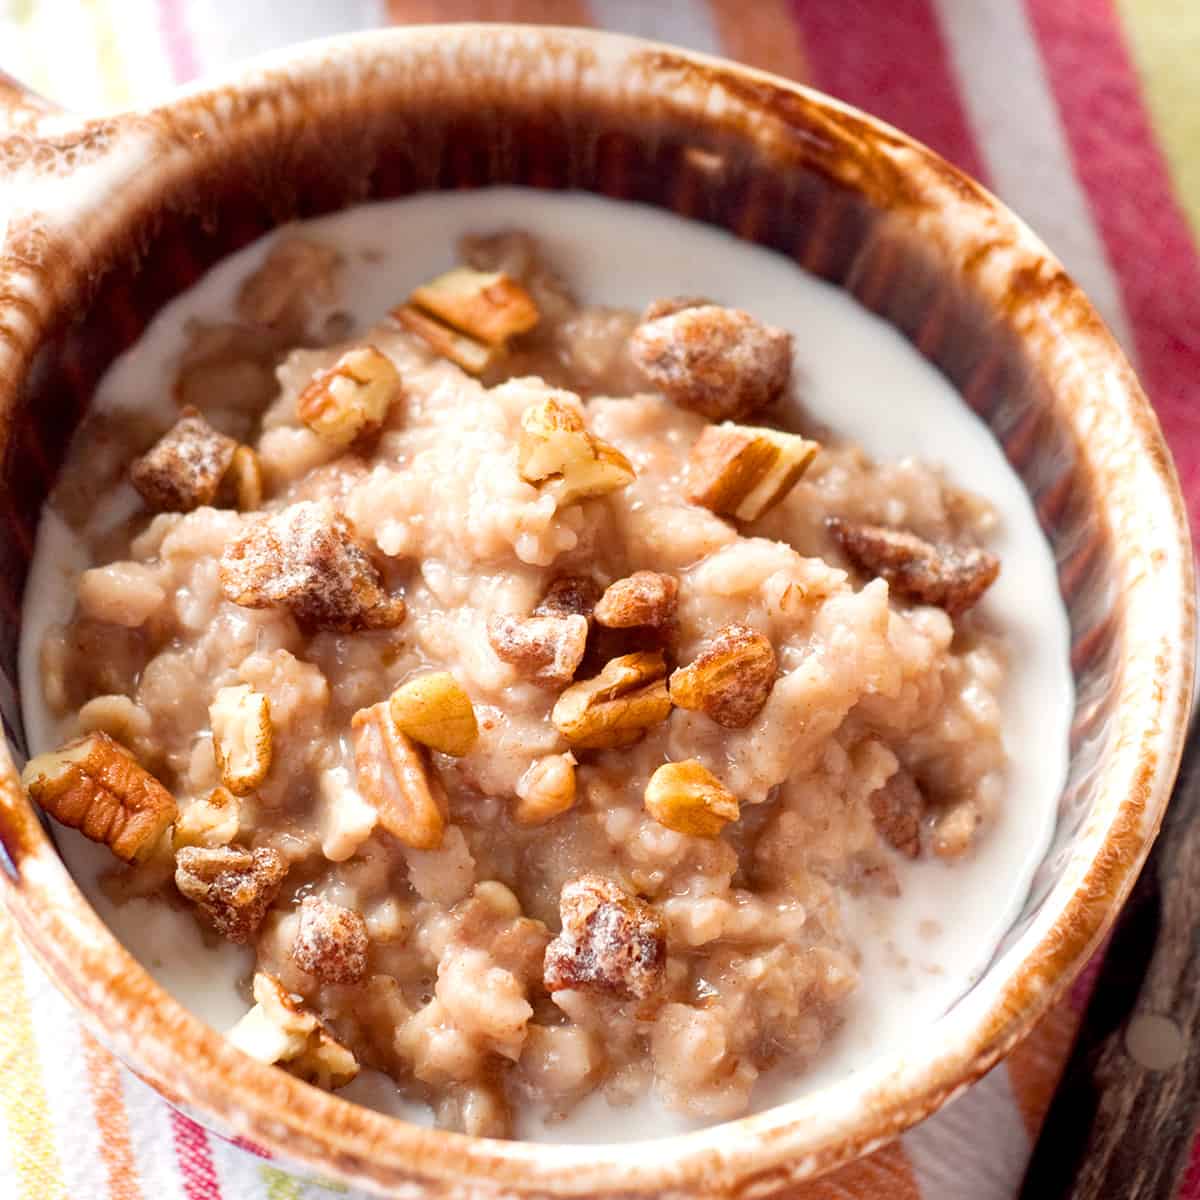 A serving of date nut oatmeal in a brown bowl.